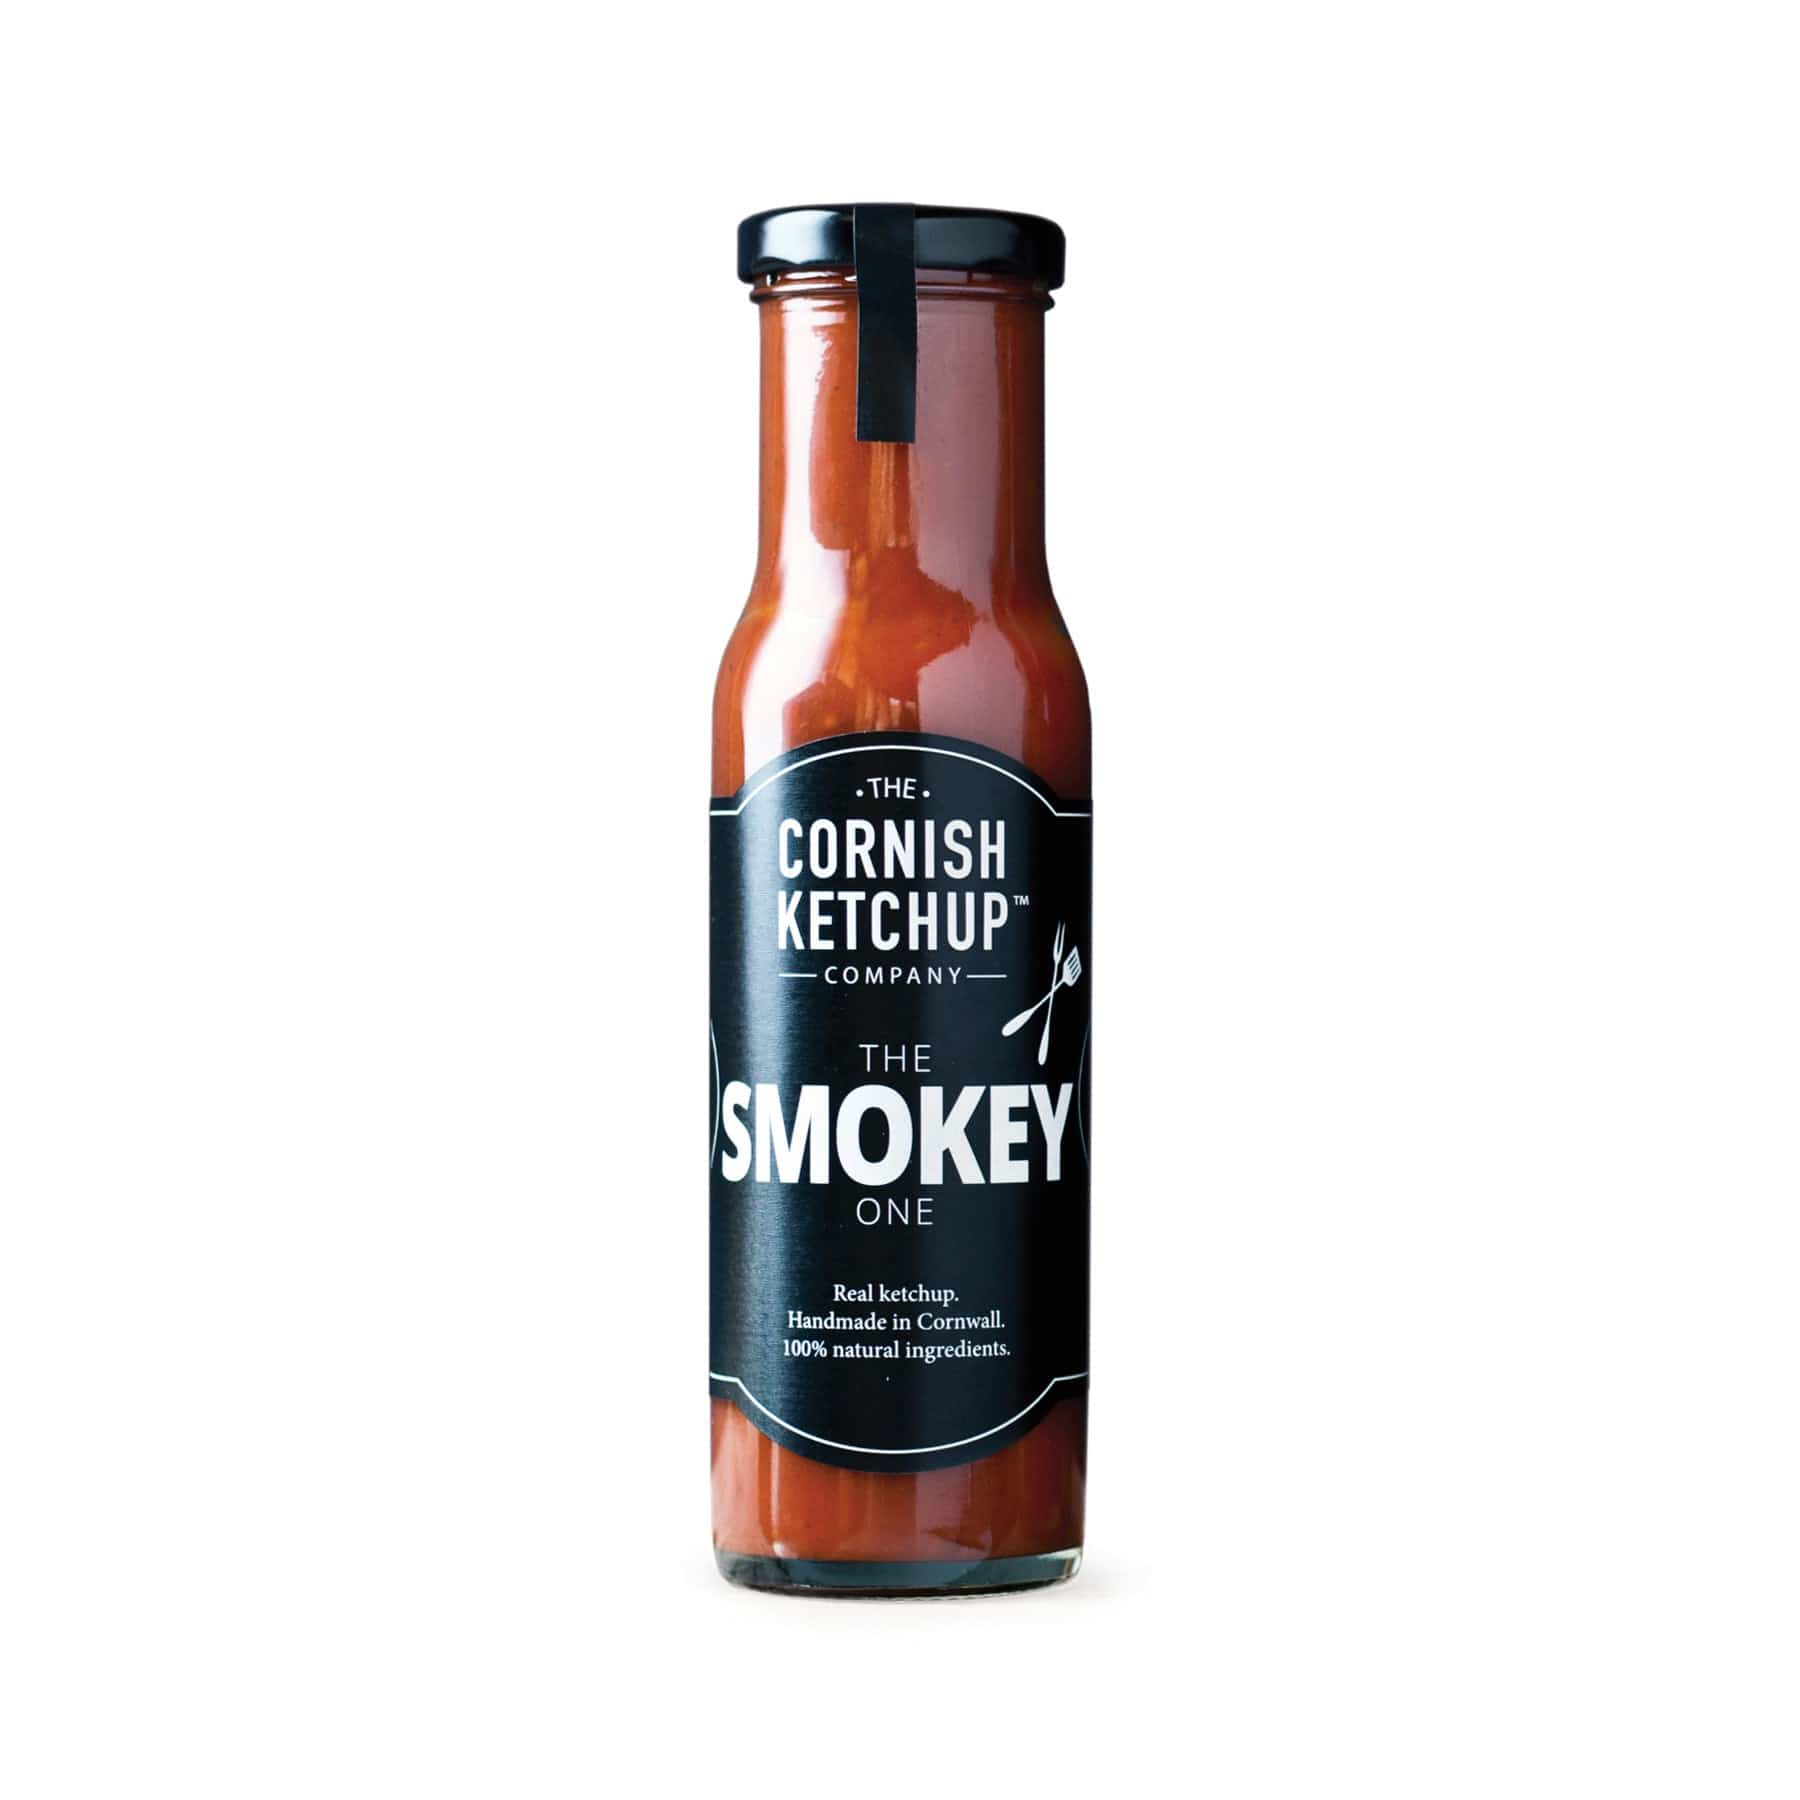 Cornish Ketchup Company smokey ketchup bottle, handmade in Cornwall with 100% natural ingredients, isolated on white background.